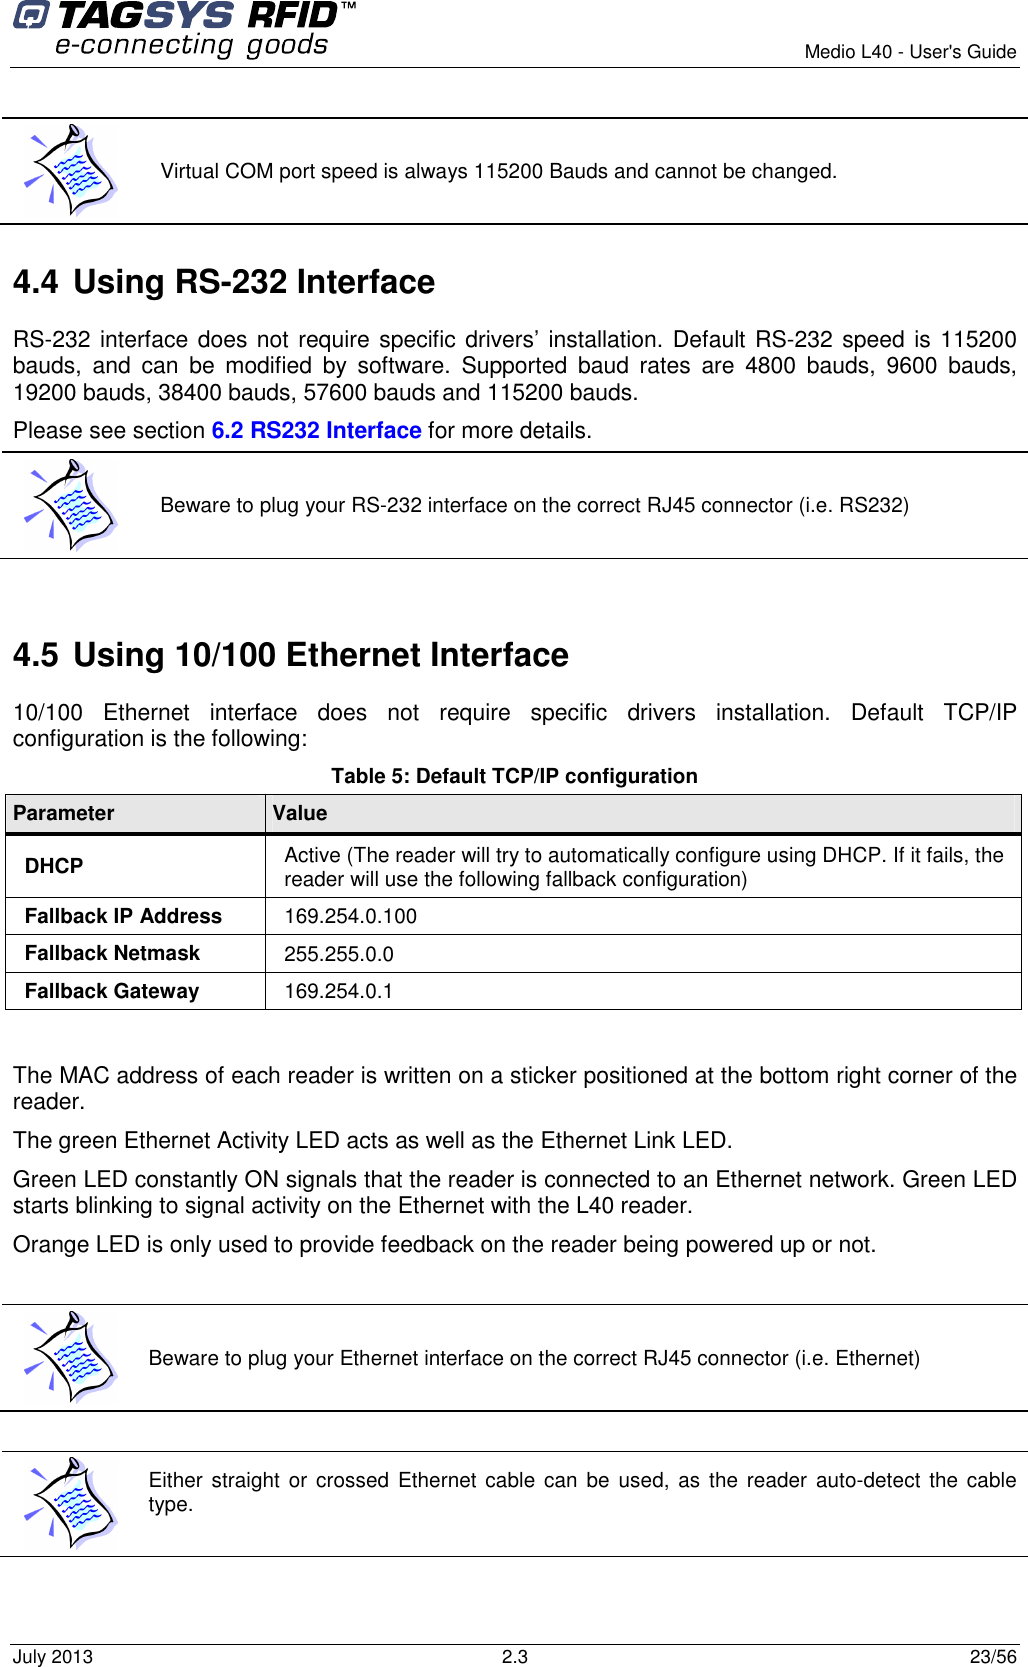        Medio L40 - User&apos;s Guide July 2013  2.3  23/56   4.4 Using RS-232 Interface RS-232 interface does not require specific drivers’ installation. Default RS-232 speed is 115200 bauds,  and  can  be  modified  by  software.  Supported  baud  rates  are  4800  bauds,  9600  bauds, 19200 bauds, 38400 bauds, 57600 bauds and 115200 bauds. Please see section 6.2 RS232 Interface for more details.  4.5 Using 10/100 Ethernet Interface 10/100  Ethernet  interface  does  not  require  specific  drivers  installation.  Default  TCP/IP configuration is the following: Table 5: Default TCP/IP configuration Parameter  Value DHCP  Active (The reader will try to automatically configure using DHCP. If it fails, the reader will use the following fallback configuration) Fallback IP Address  169.254.0.100 Fallback Netmask  255.255.0.0 Fallback Gateway  169.254.0.1  The MAC address of each reader is written on a sticker positioned at the bottom right corner of the reader. The green Ethernet Activity LED acts as well as the Ethernet Link LED. Green LED constantly ON signals that the reader is connected to an Ethernet network. Green LED starts blinking to signal activity on the Ethernet with the L40 reader. Orange LED is only used to provide feedback on the reader being powered up or not.    Either straight or  crossed  Ethernet cable  can  be used,  as the  reader  auto-detect  the cable type.    Virtual COM port speed is always 115200 Bauds and cannot be changed.  Beware to plug your RS-232 interface on the correct RJ45 connector (i.e. RS232)  Beware to plug your Ethernet interface on the correct RJ45 connector (i.e. Ethernet) 